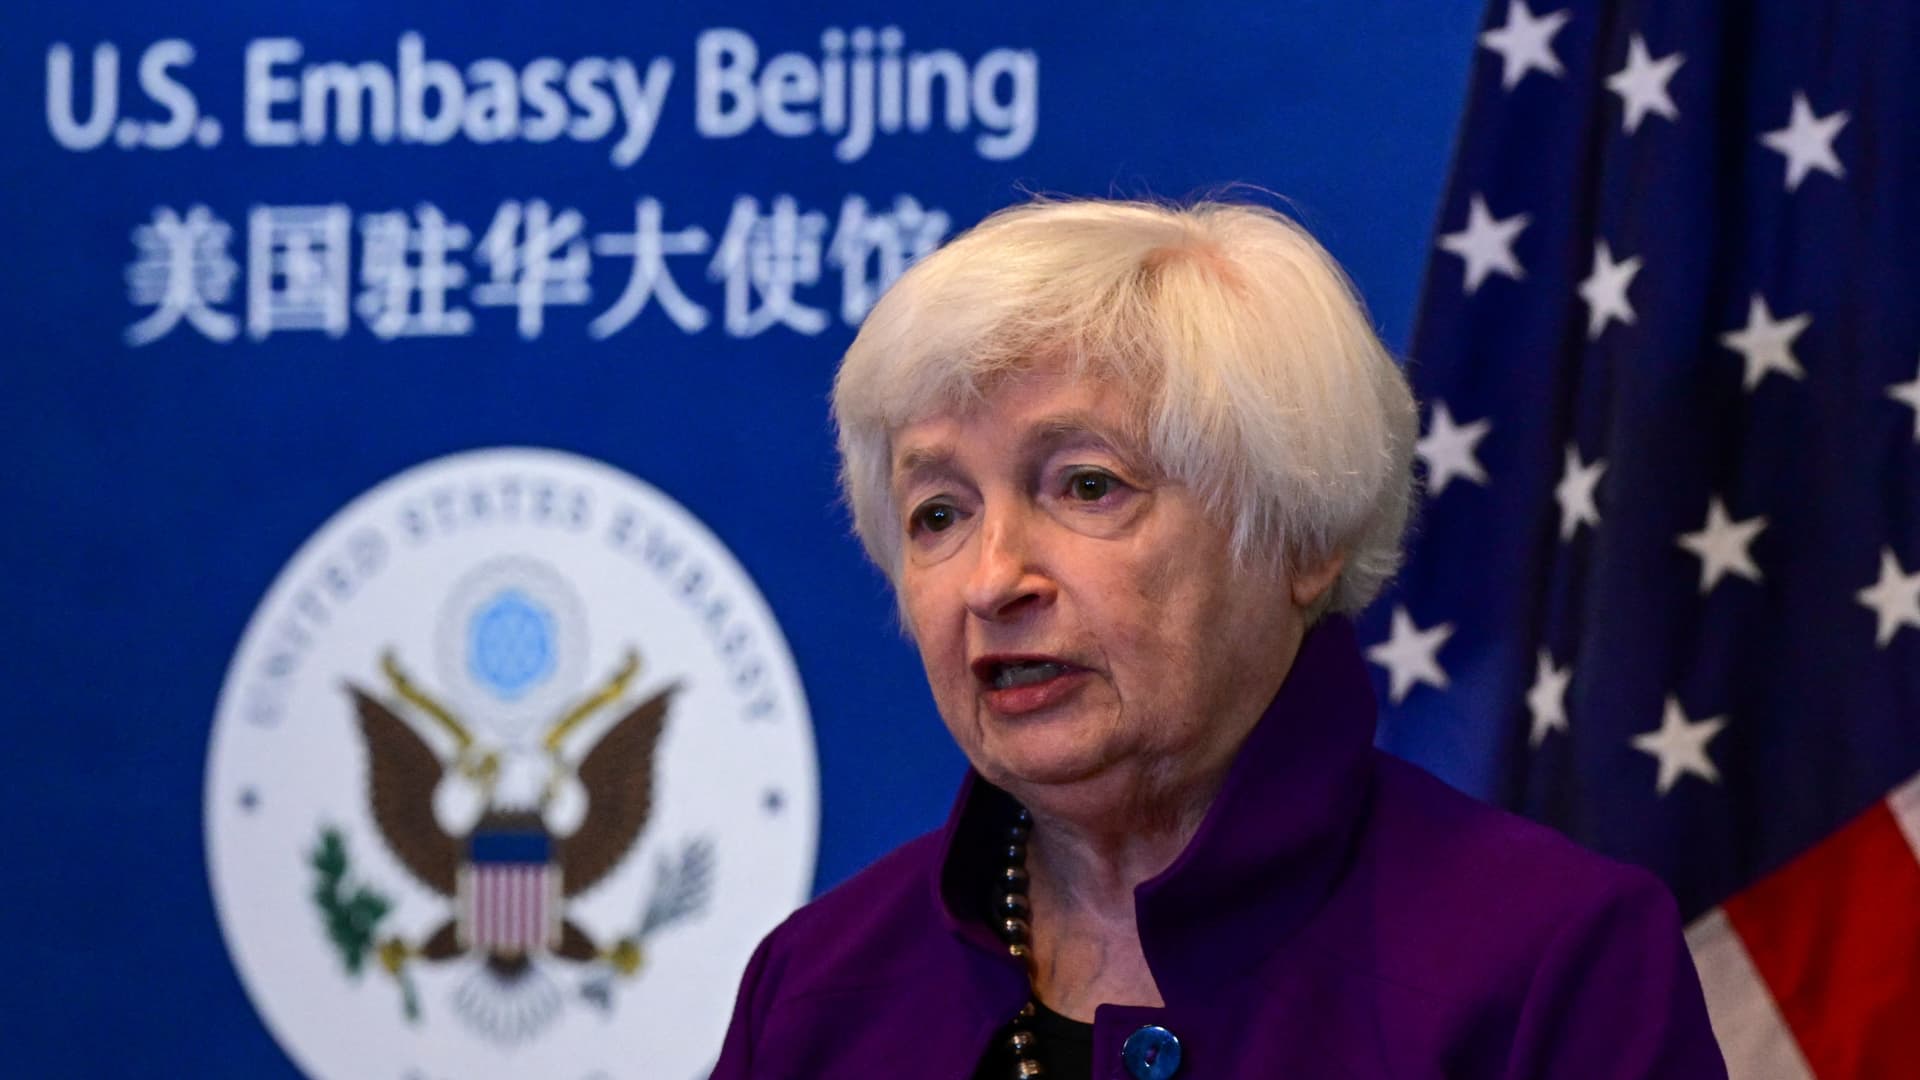 Yellen claims ‘direct’ and ‘productive’ talks a action forward in putting U.S.-China ties on ‘surer footing’